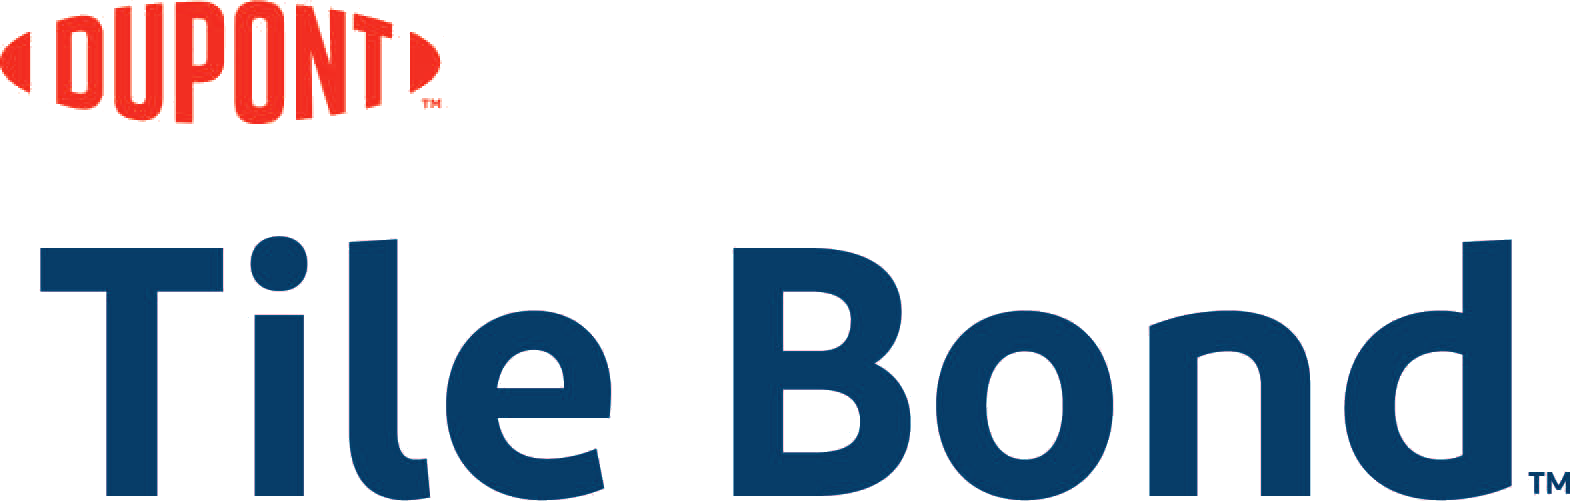 A blue and black logo for the book